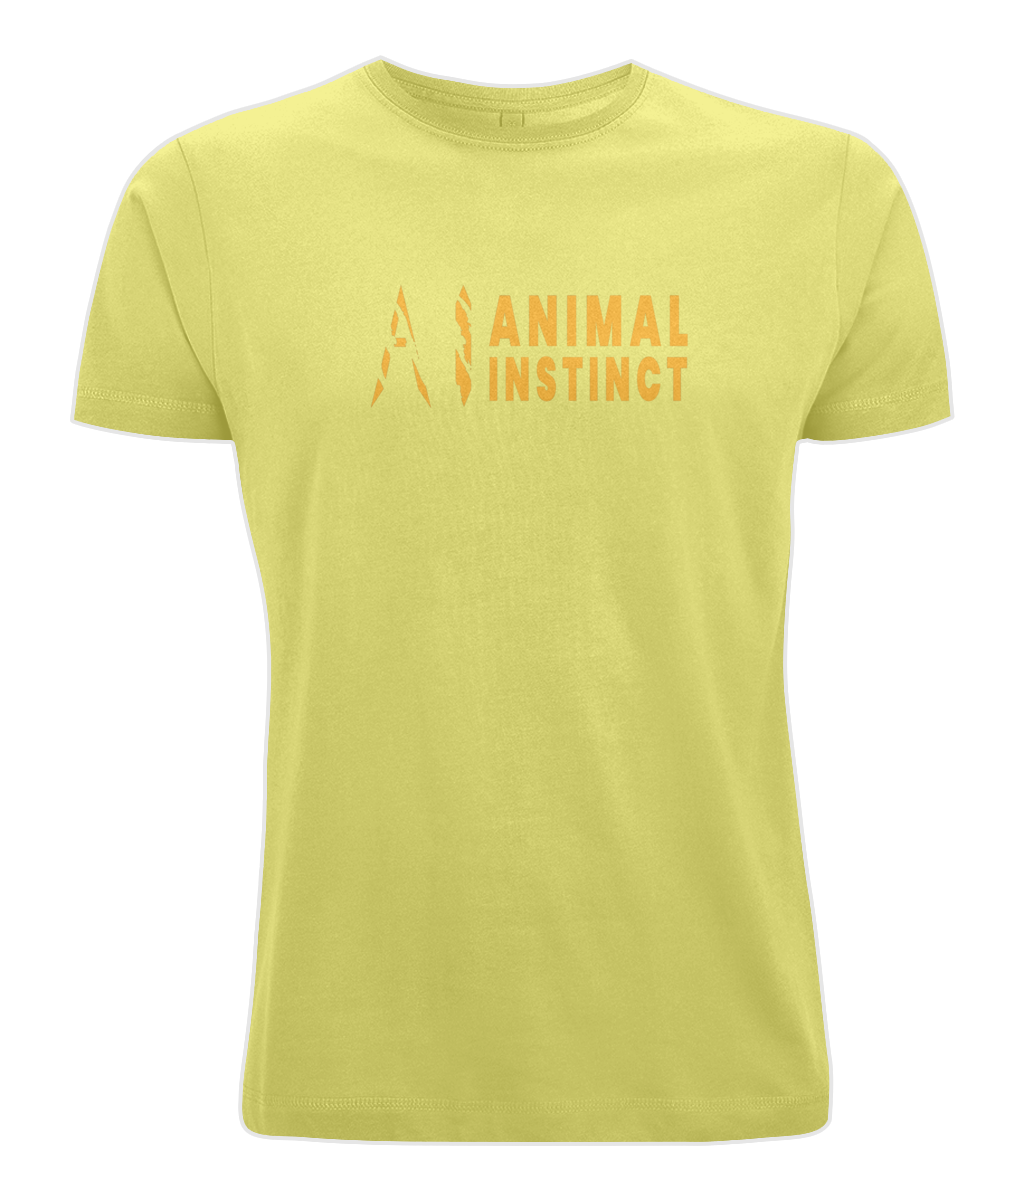 Mens yellow Graphic Animal Instinct T-Shirt with Premium gold AI logo and Animal Instinct written in premium gold Across the middle of the chest